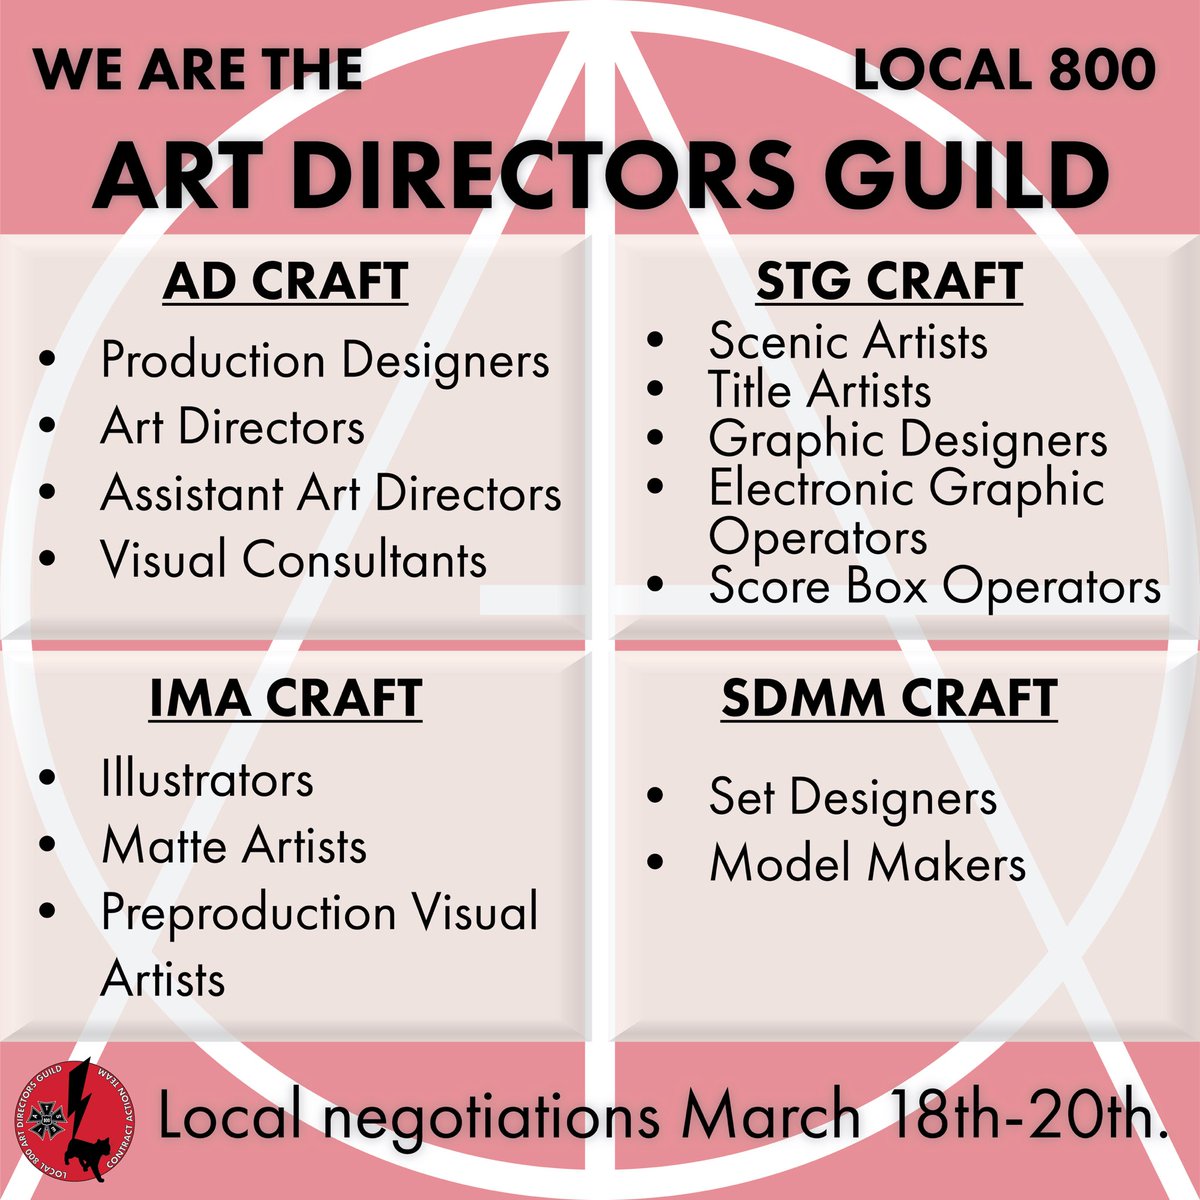 Many crafts one fight! This is Hollywood Art Directors Guild. Local negotiations start on Monday! #IATSE #ADG800 #UnionStrong